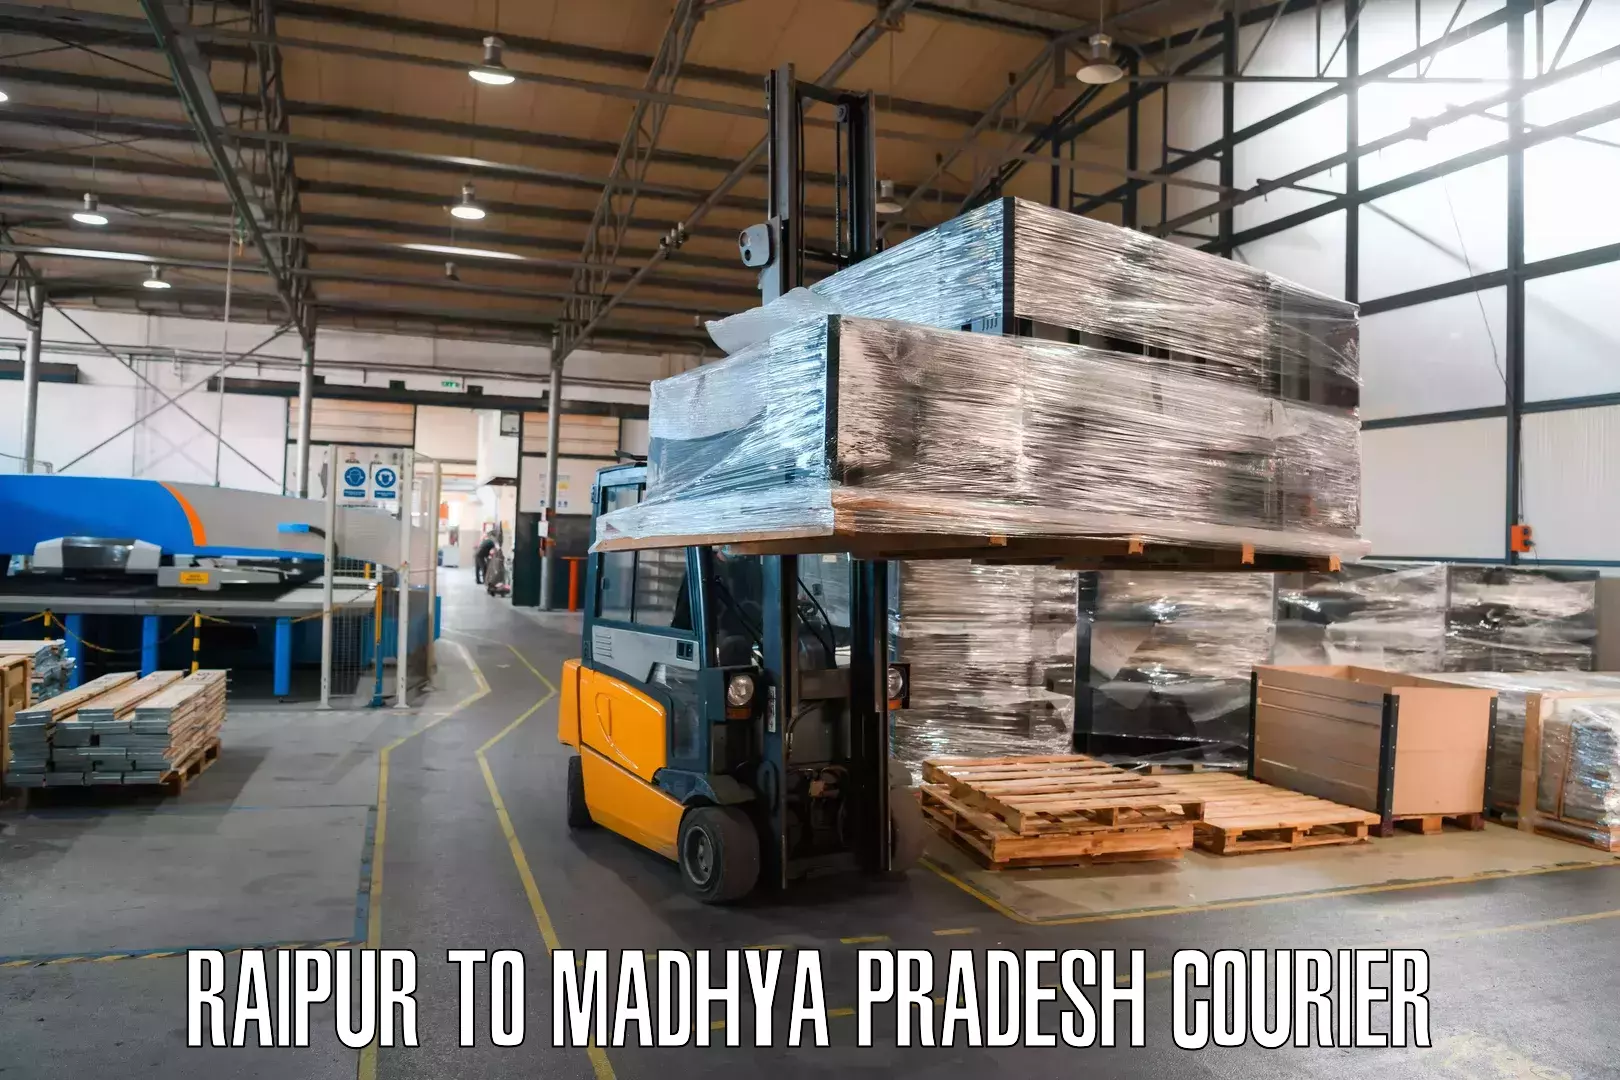 State-of-the-art courier technology Raipur to Bhopal